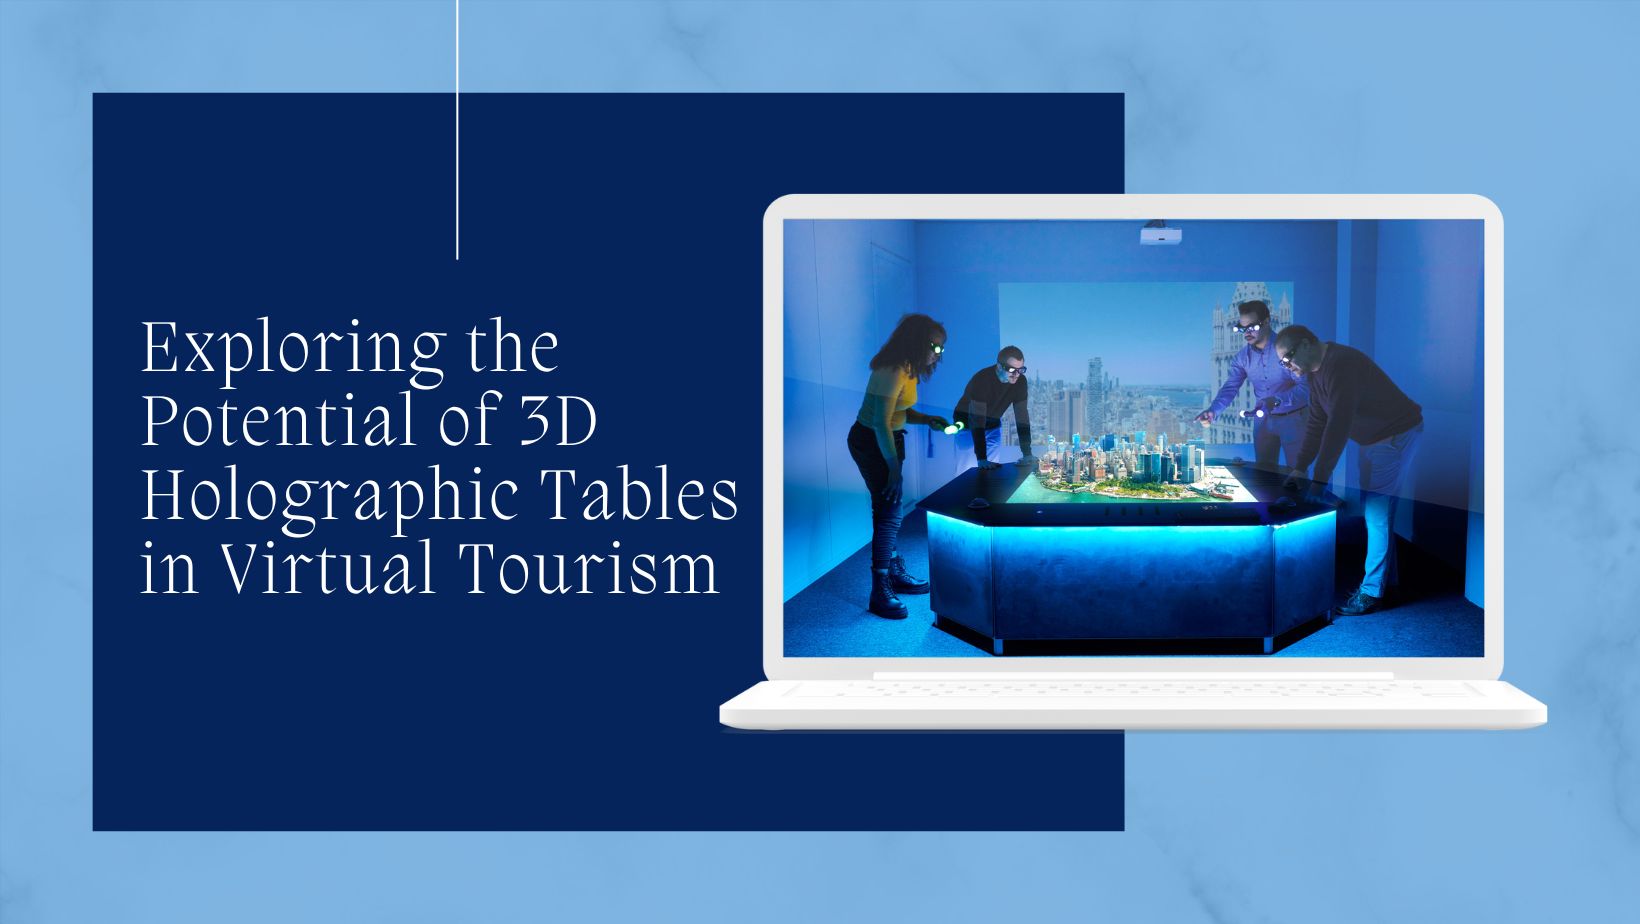 Exploring the Potential of 3D Holographic Tables in Virtual Tourism